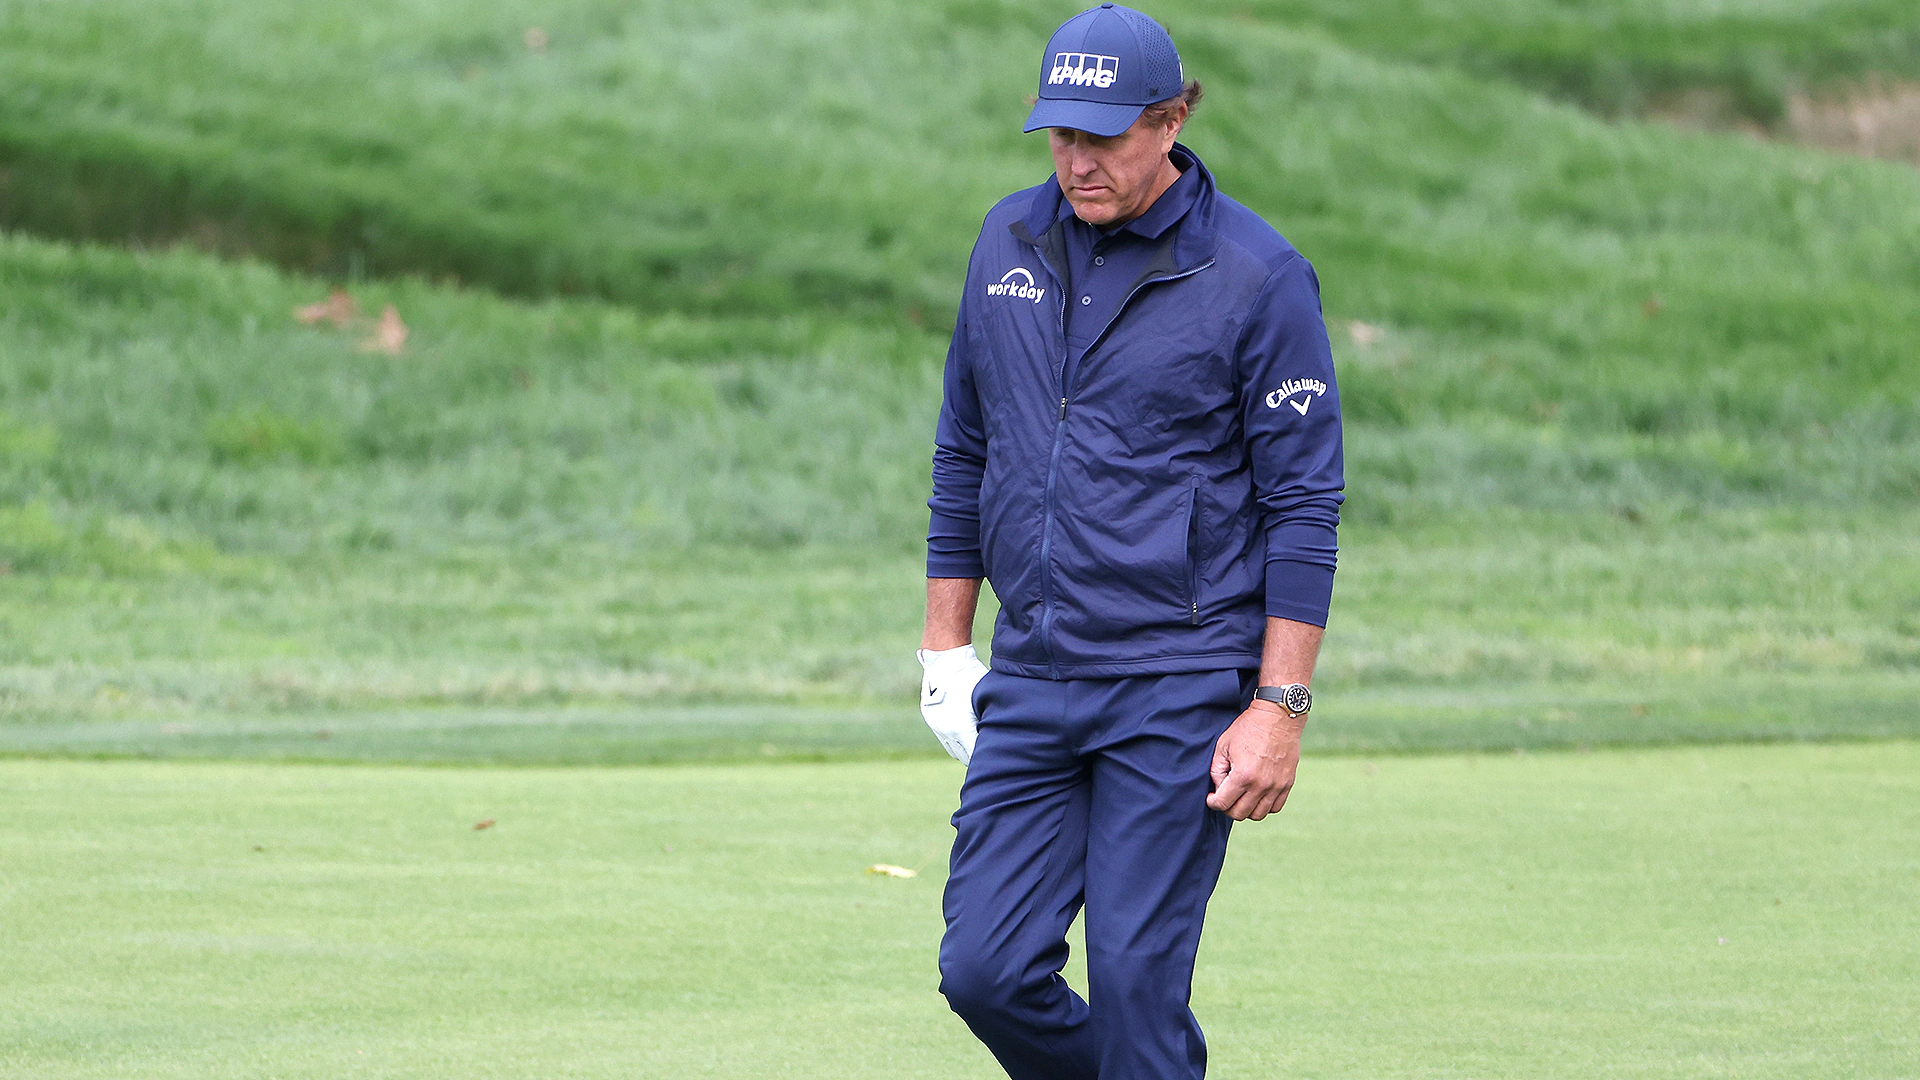 79-74 ends Phil Mickelson's Grand Slam hopes for another year 2